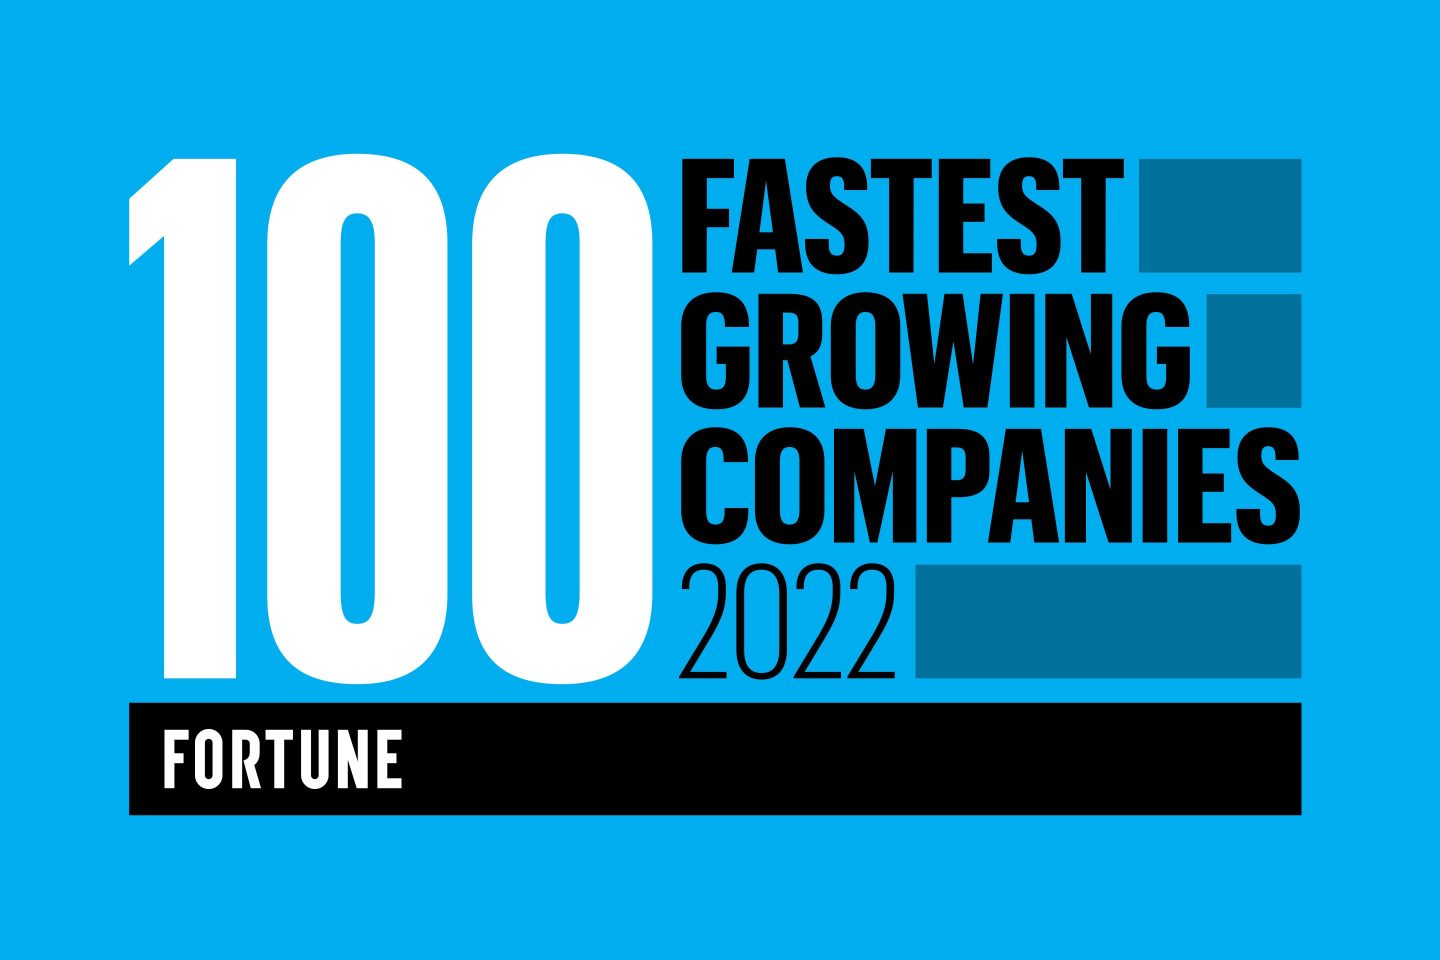 Fortune’s 2022 list of the 100 Fastest Growing Companies